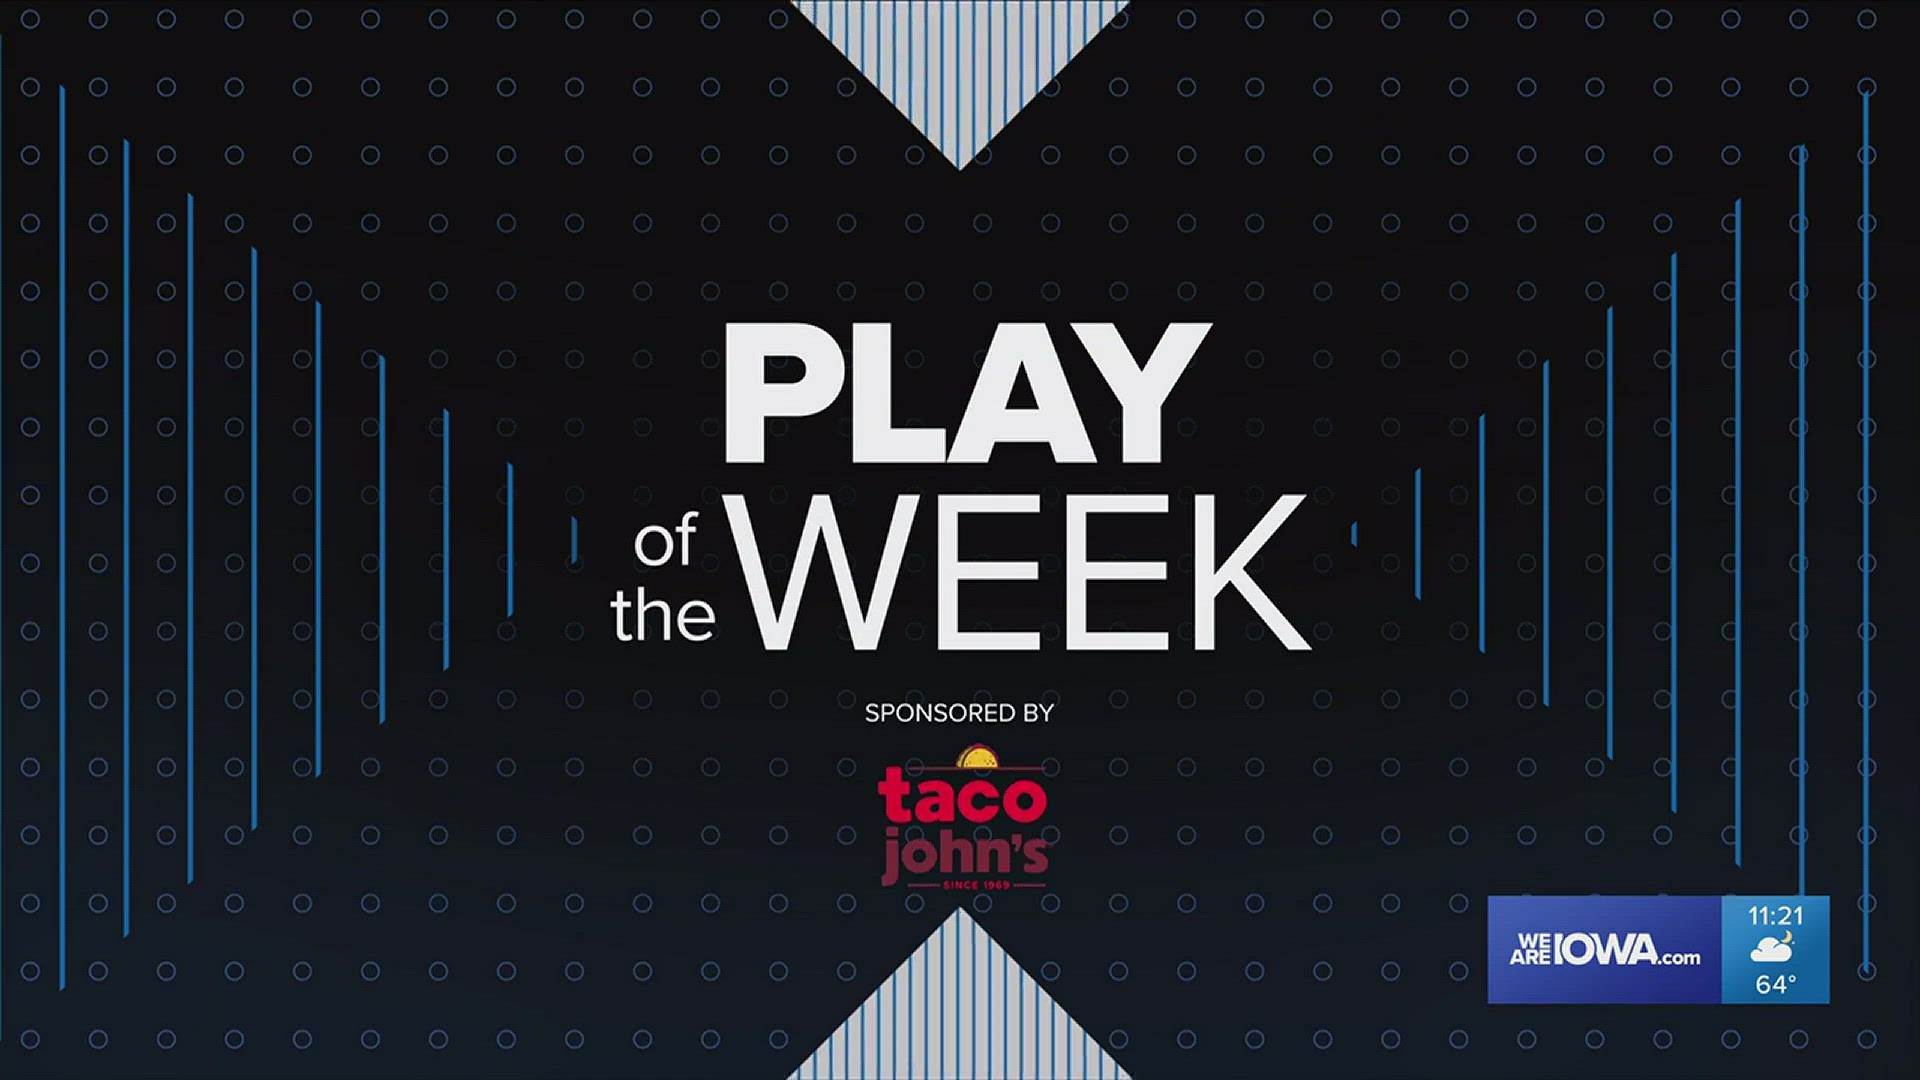 The 'Play of the Week' is brought to you by Taco John's.